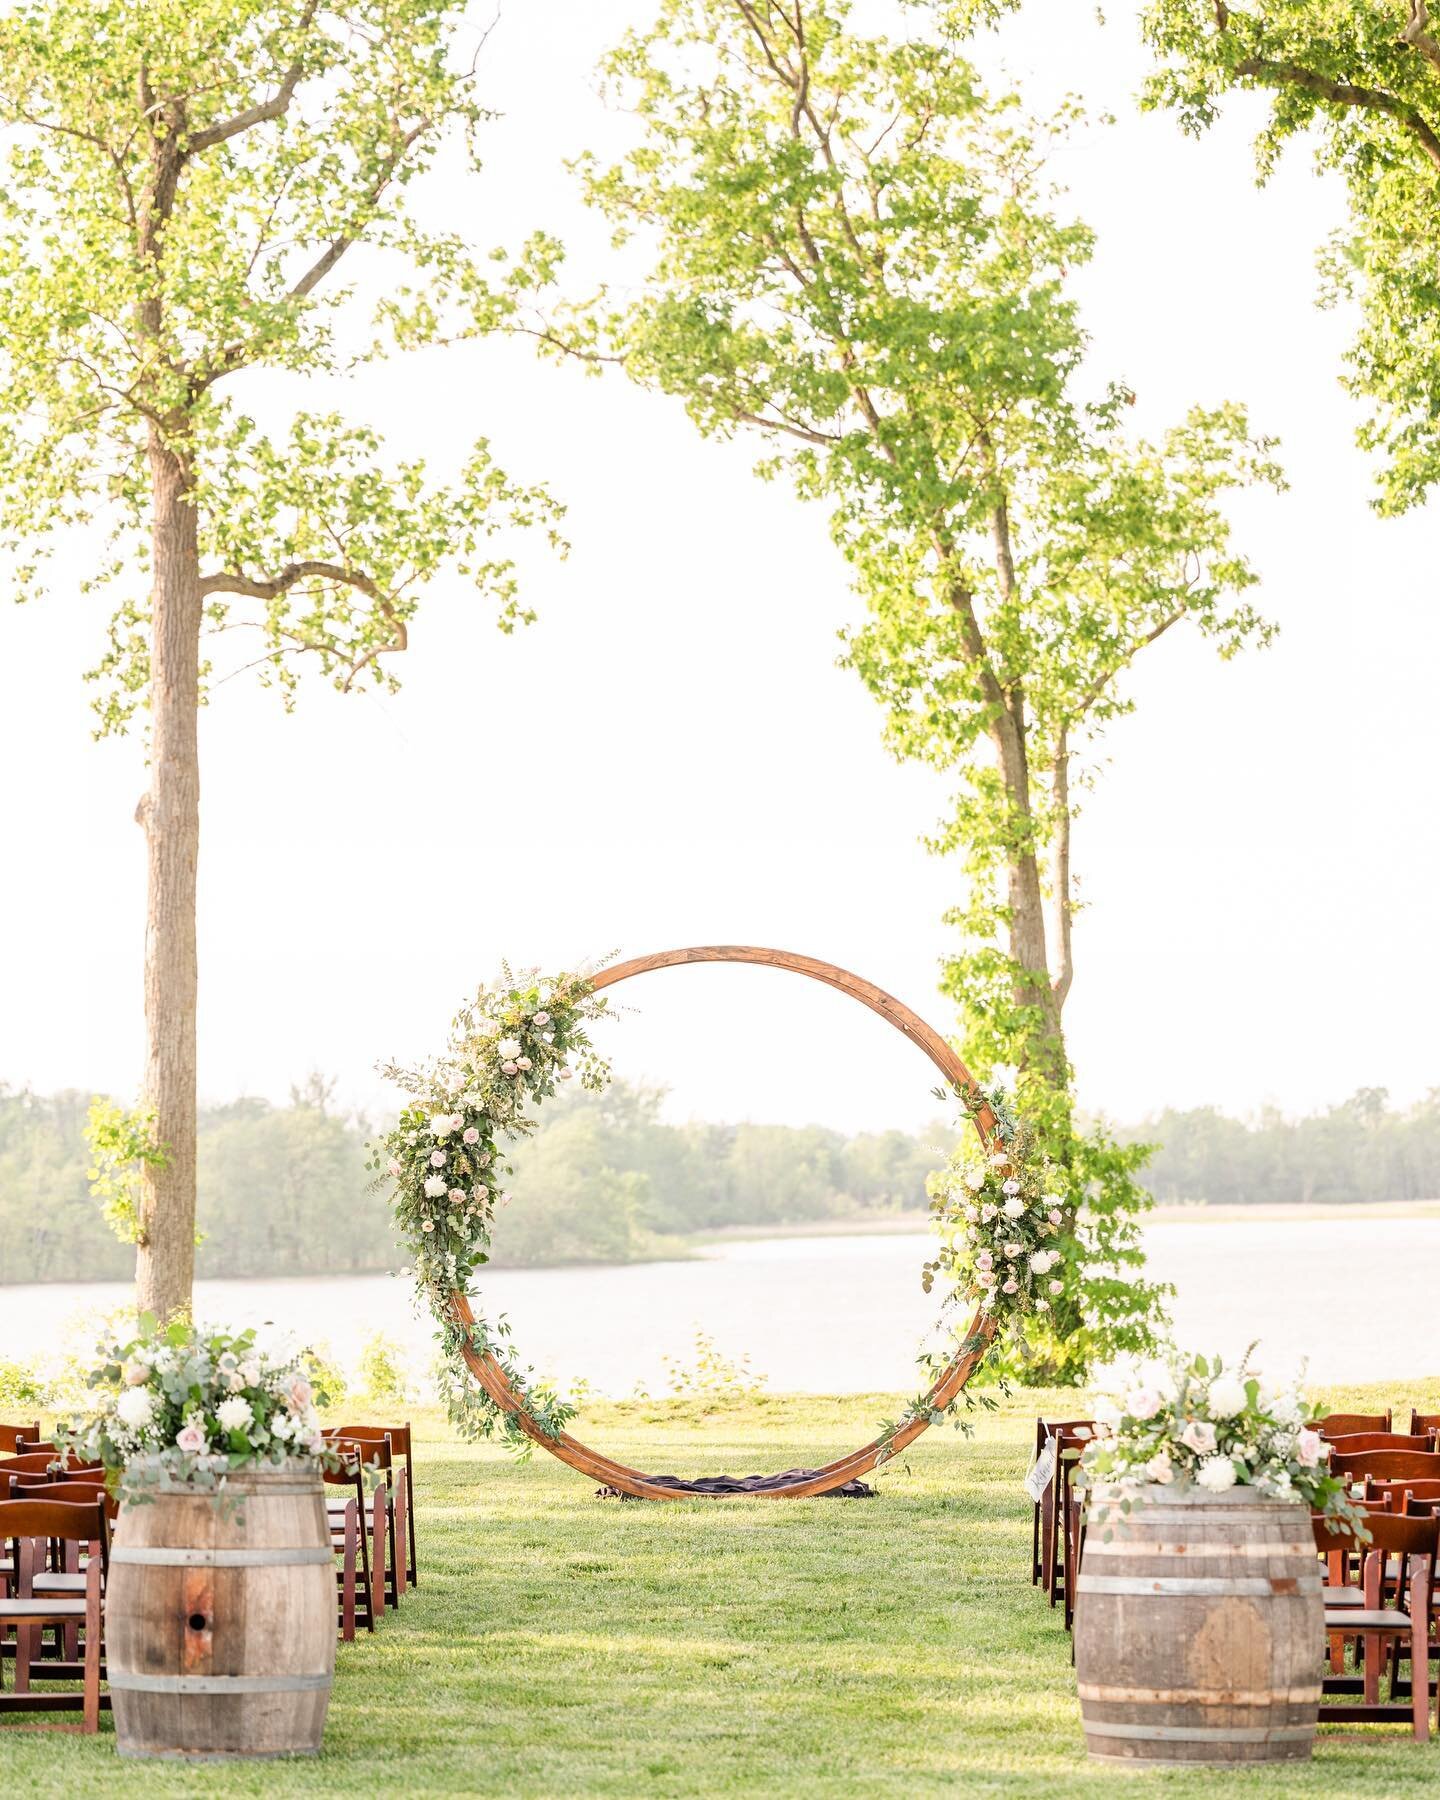 What a view! We love a ceremony by the water🌿🌷 also can we get an applause for the flowers 👏🏻